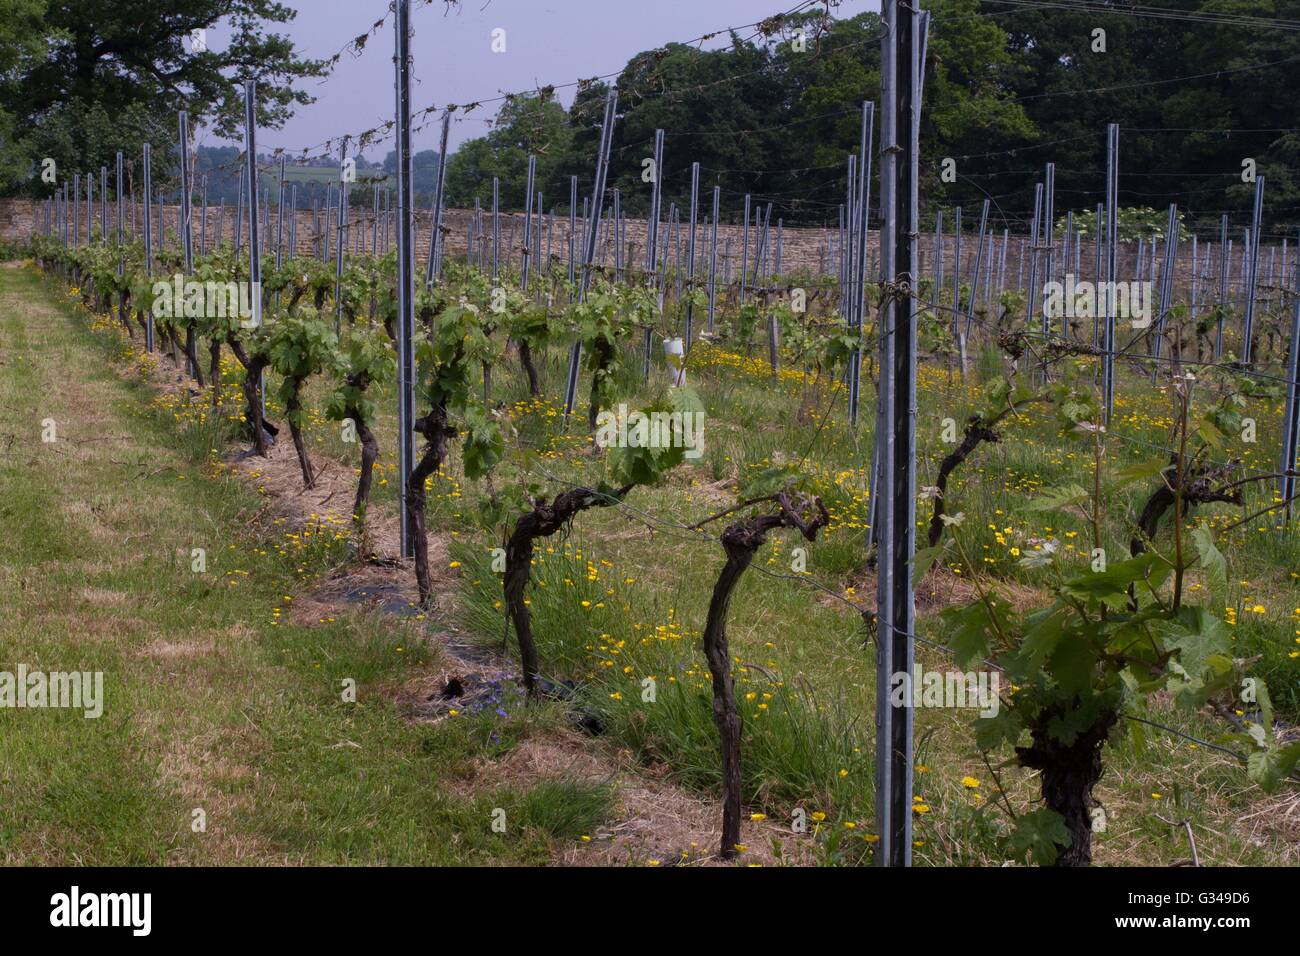 A view of the plantation at the Renishaw Hall vineyard in Sheffield. Stock Photo